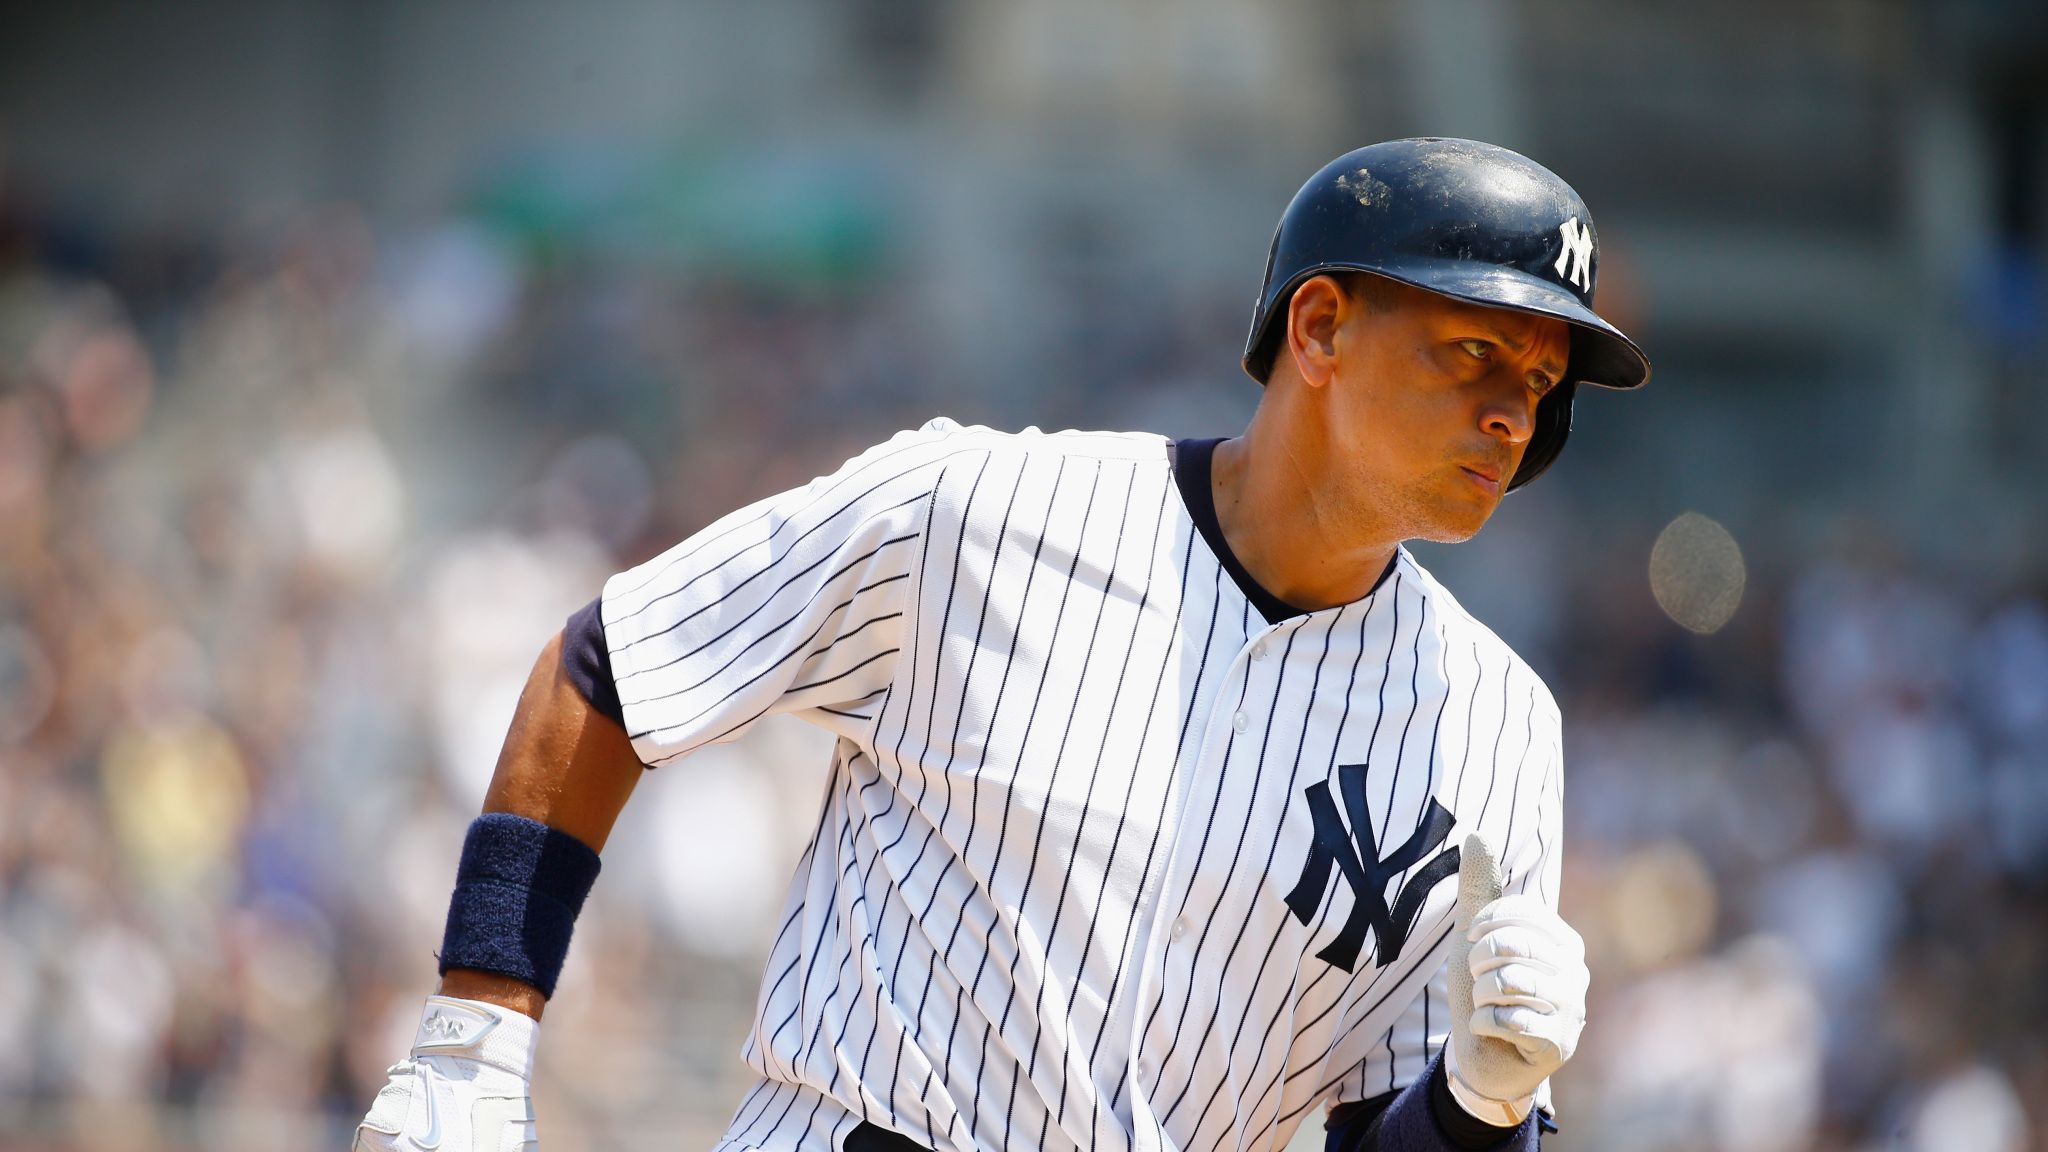 Alex Rodriguez - One of the best Baseball Players of all time